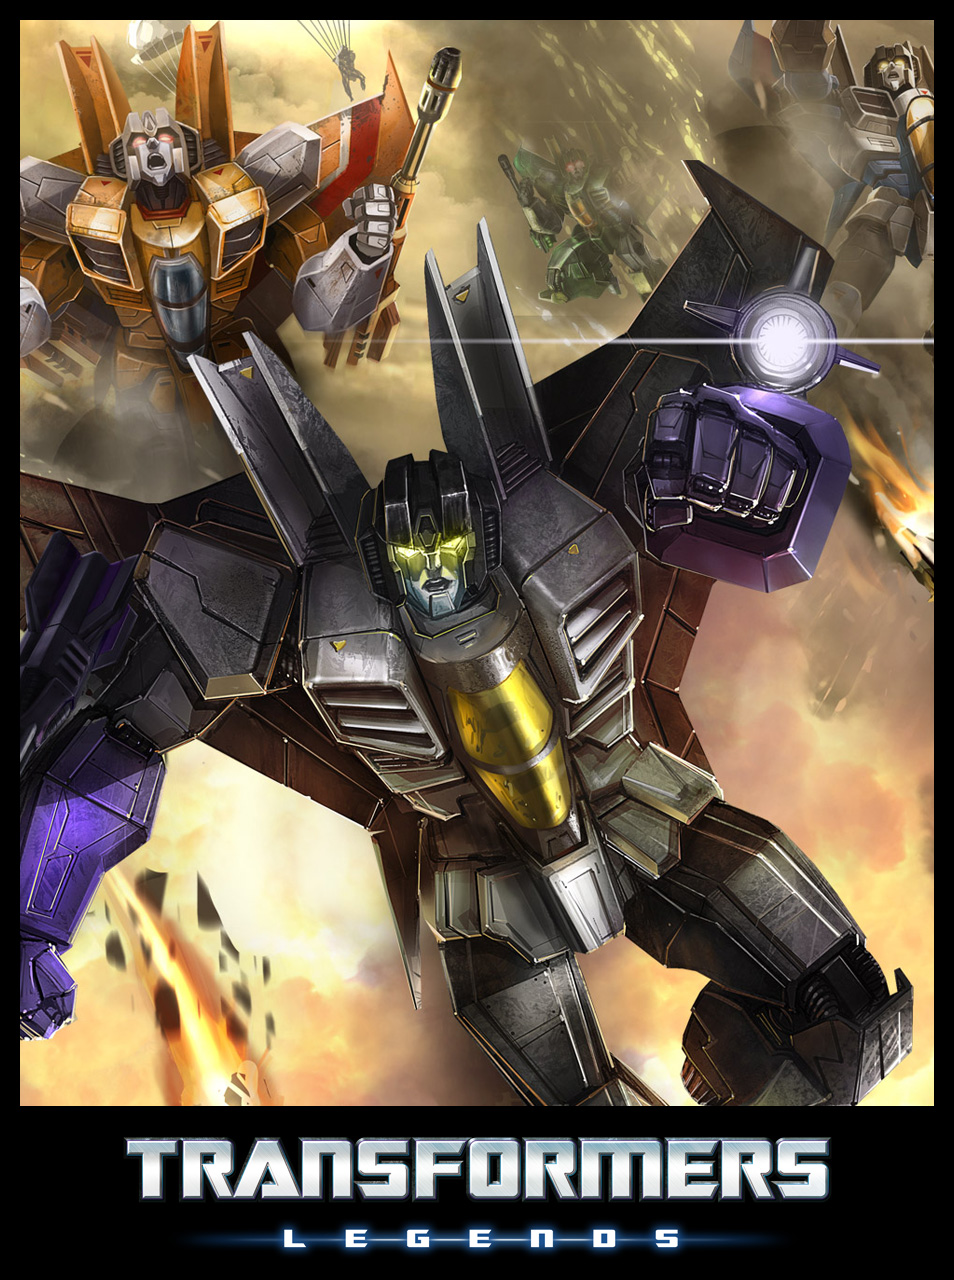 TRANSFORMERS: LEGENDS Free-to-Play Game launches for iPhone, iPad, iPod Touch + Android